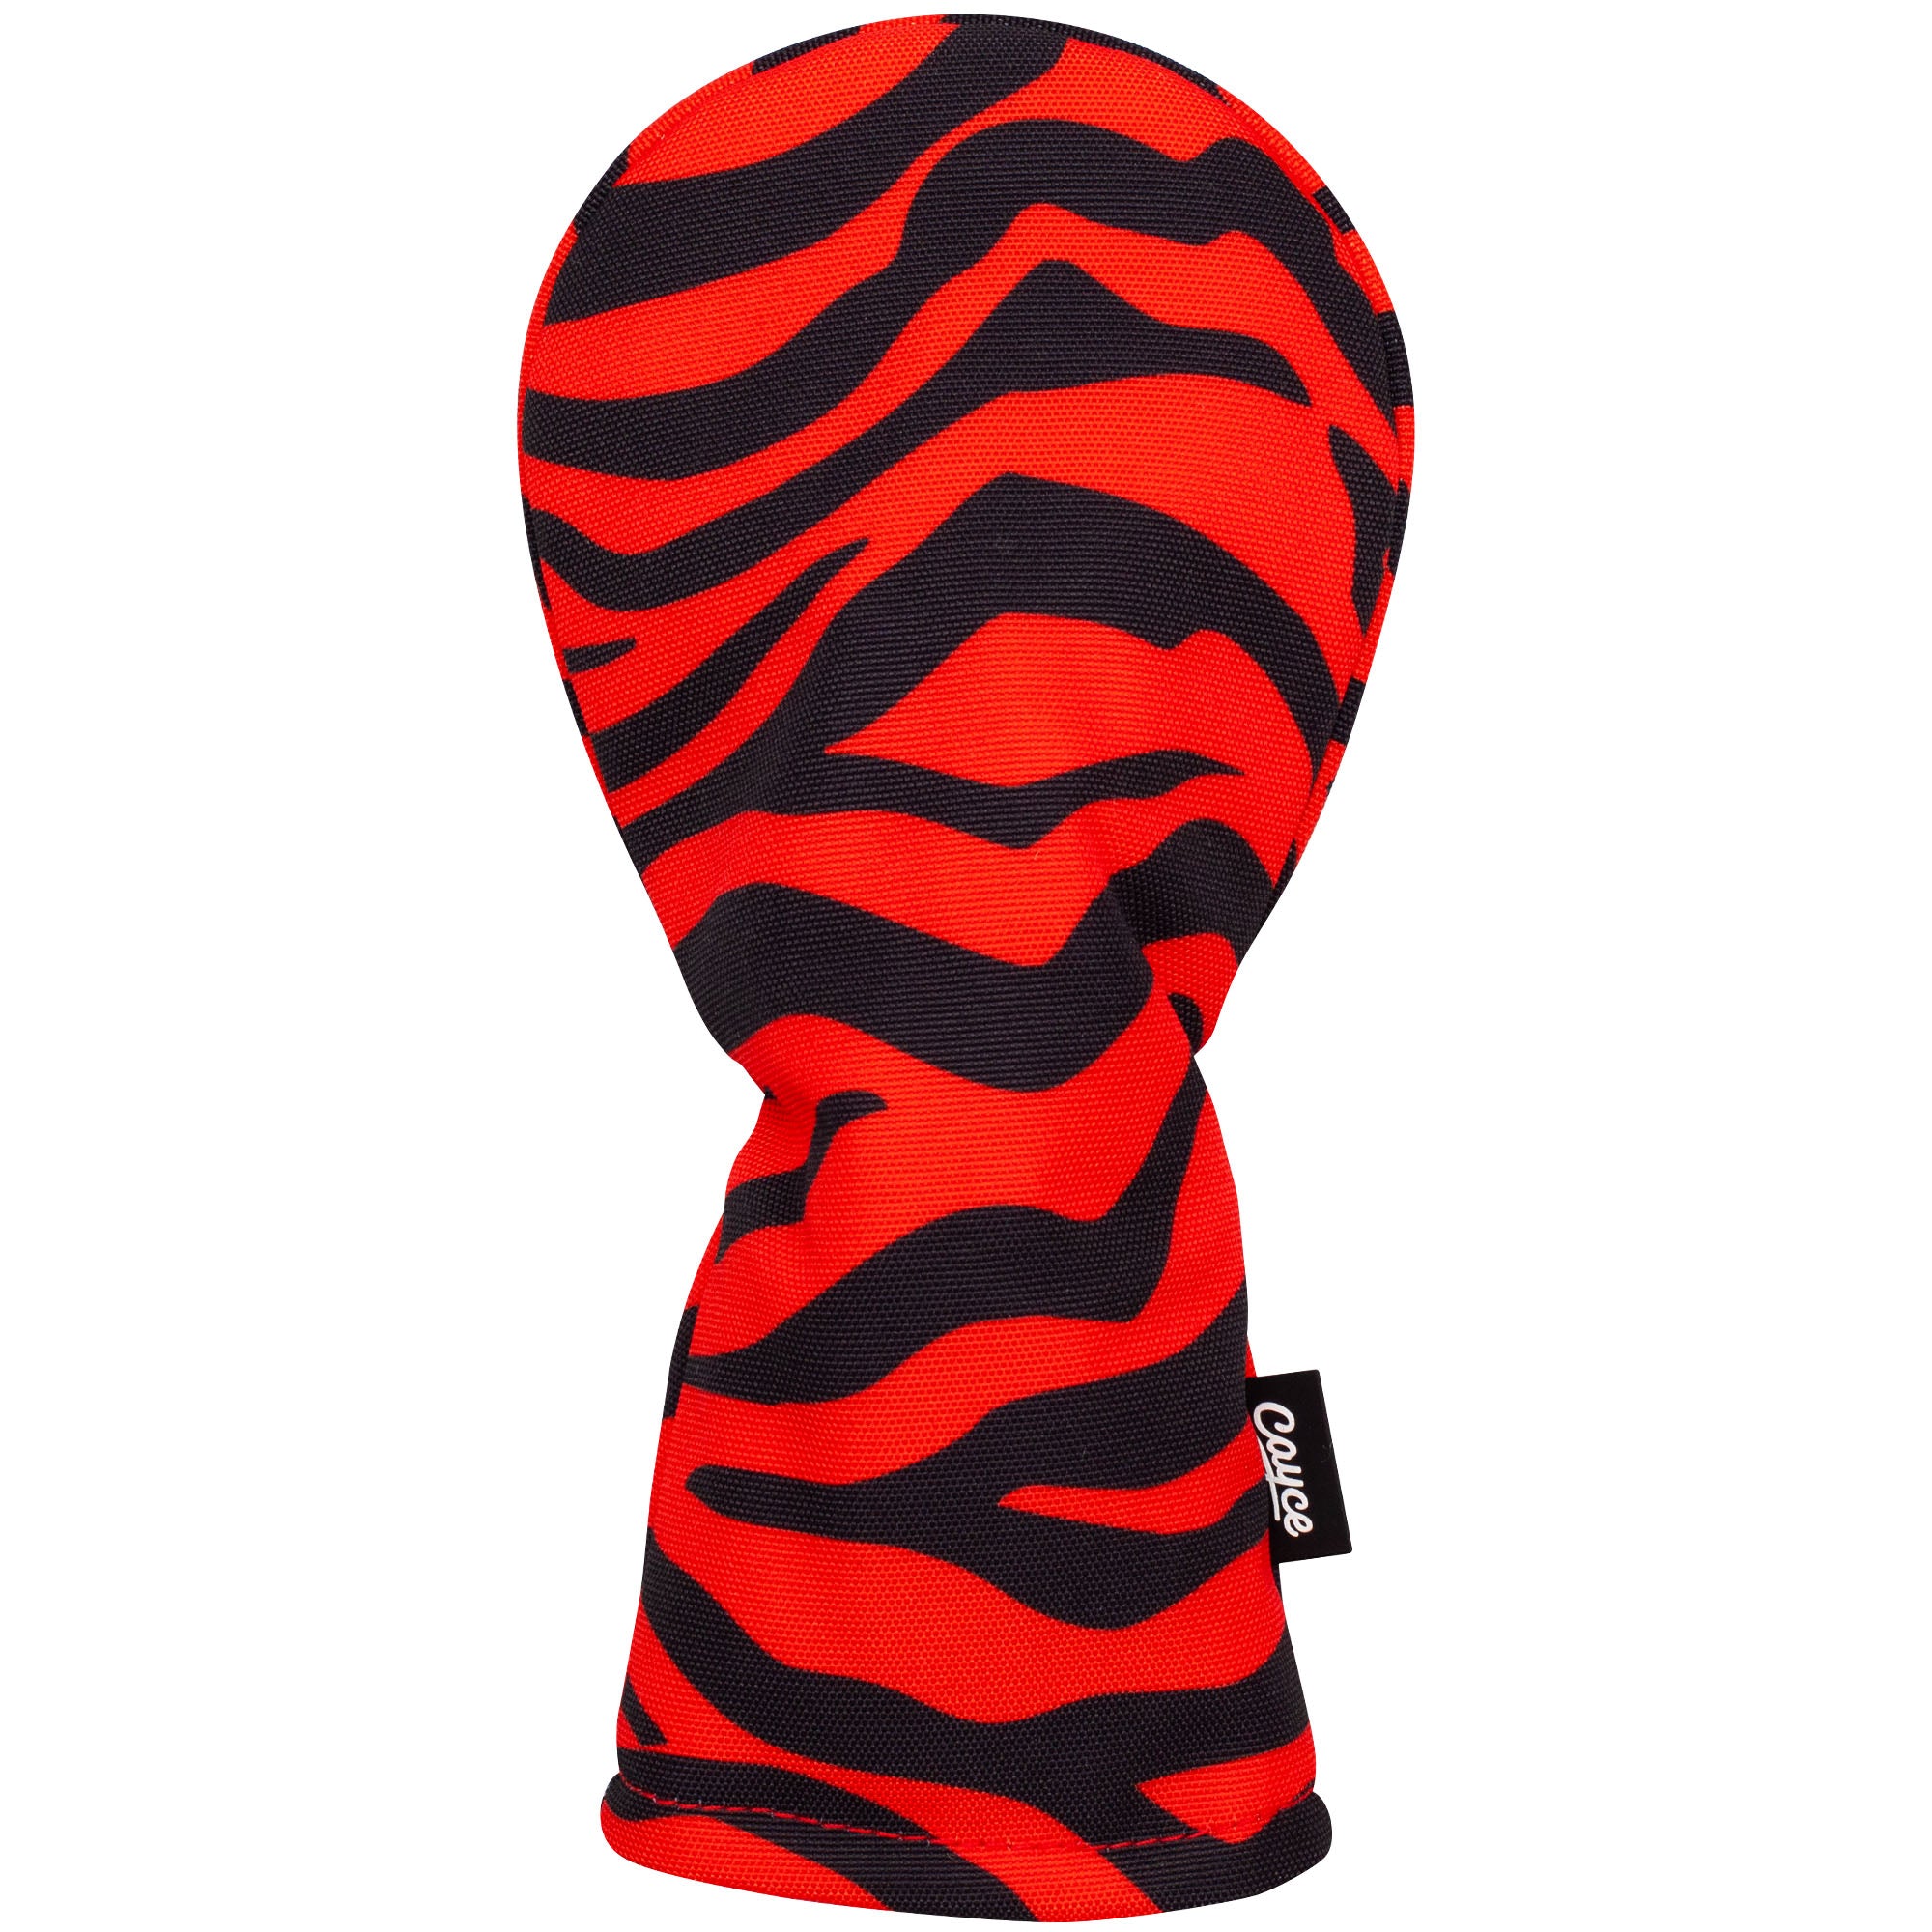 A bright, orange, and black tiger-striped, hour-glass-shaped hybrid headcover cover for golf.